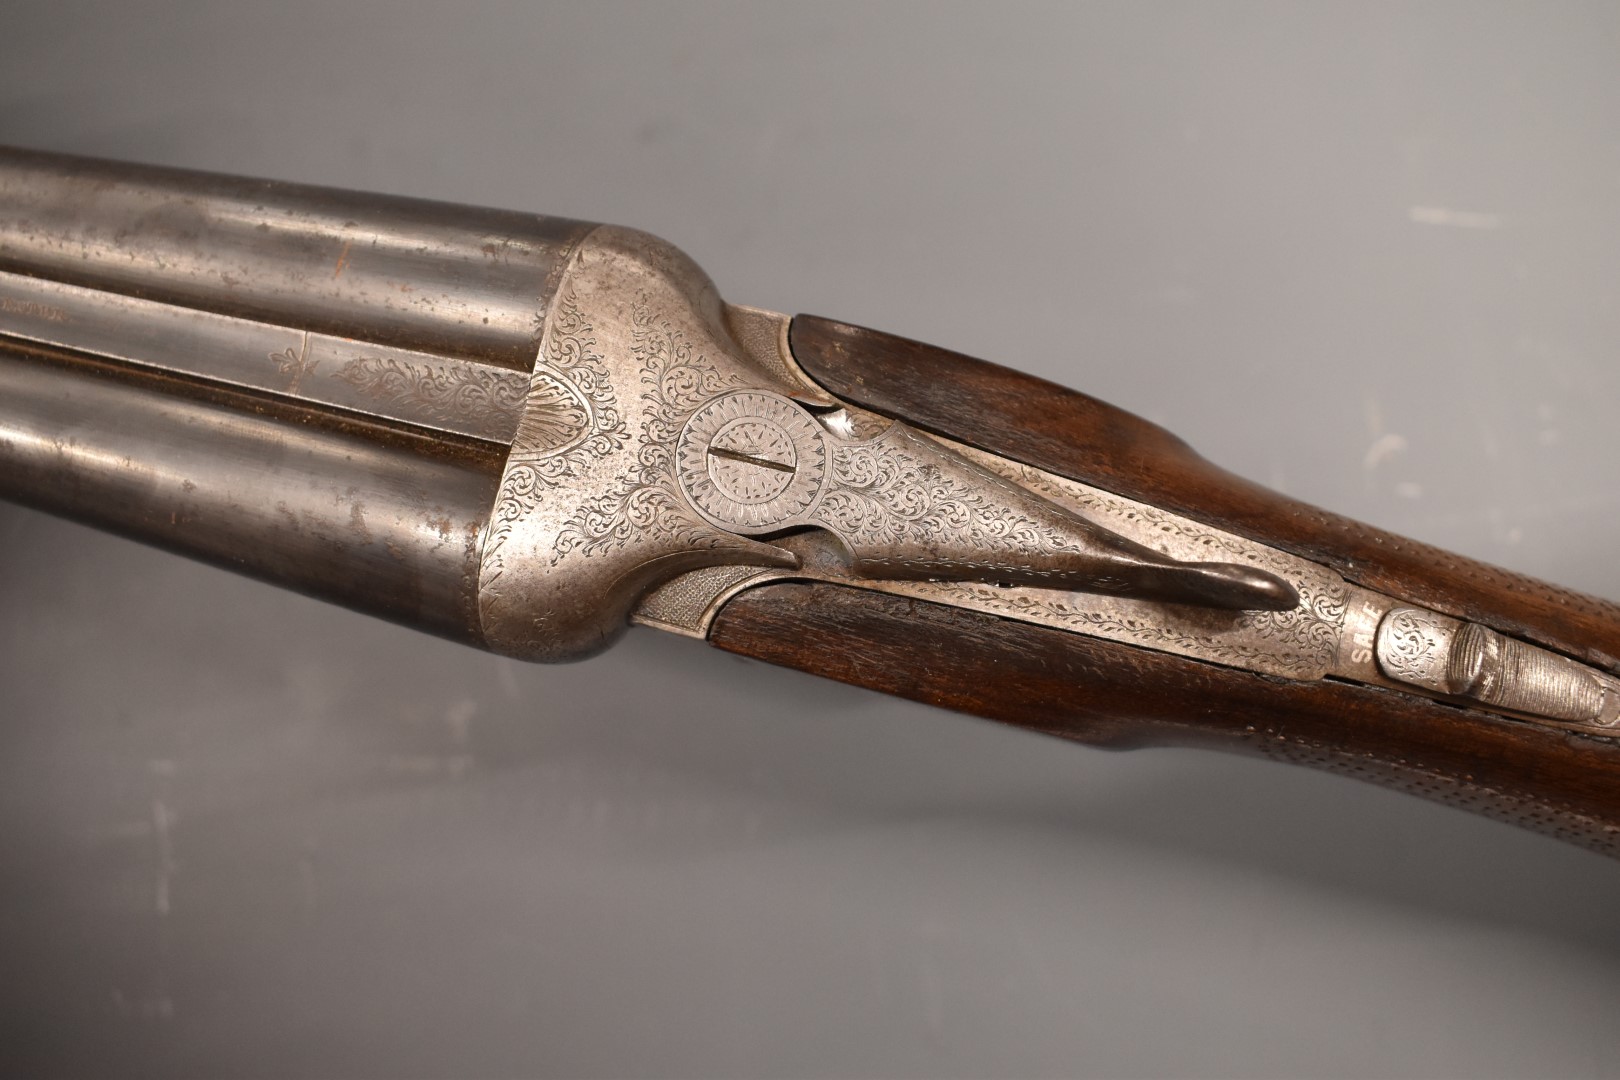 Herbert E Pollard & Co of Worcester 16 bore side by side shotgun with scrolling engraving to the - Image 11 of 11